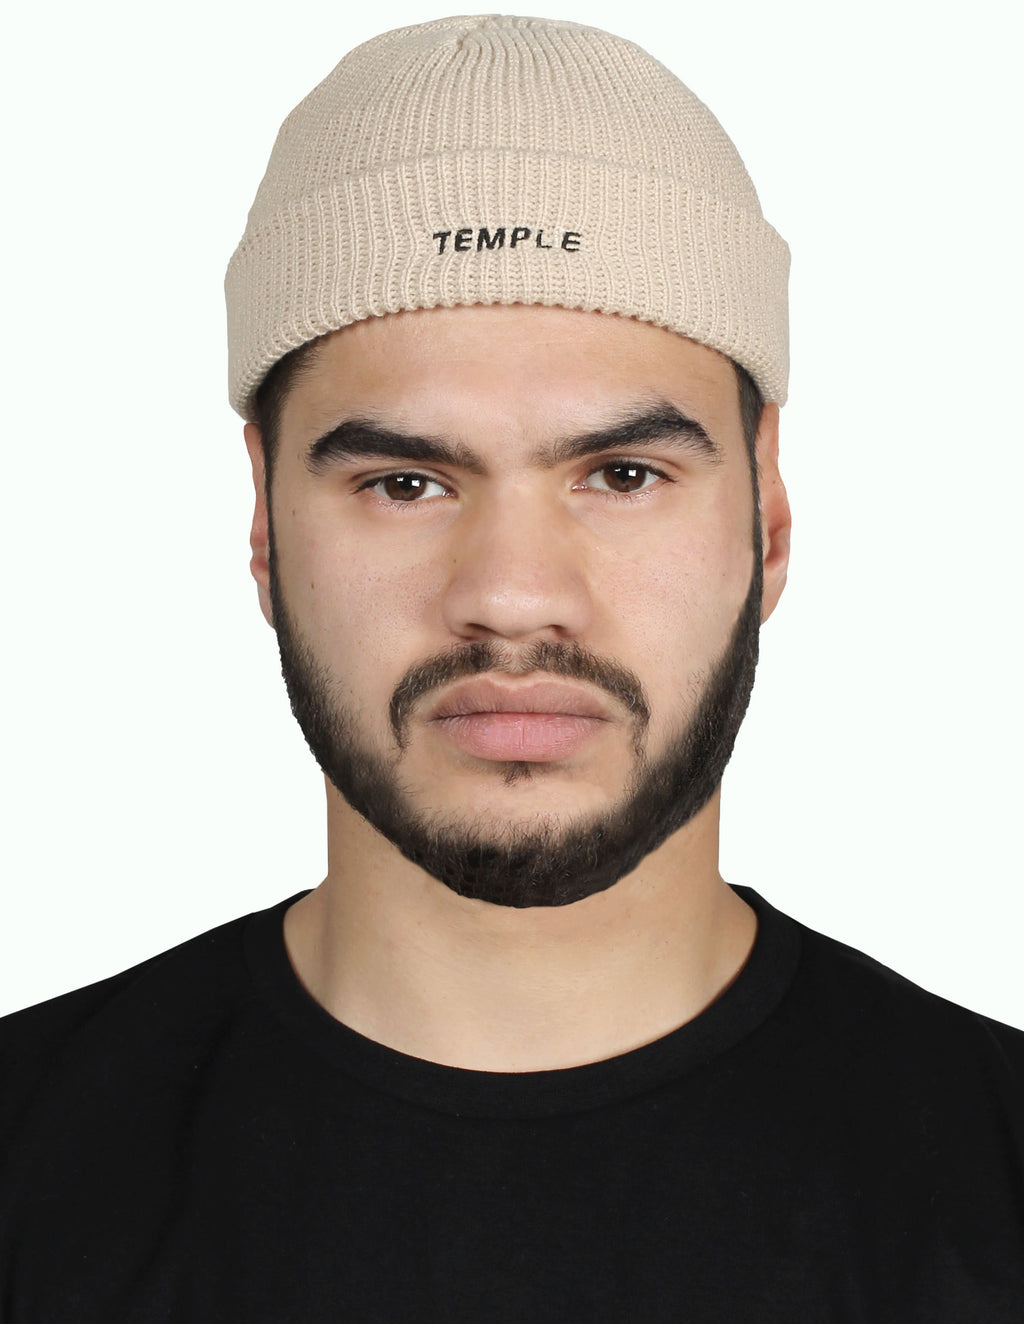 Temple Wear New Collection collectie Streetwear Skate Jacket Shirt Hoodie Sweater Cap Hat FW SS Fall Winter Spring Summer Warm beanie fisher man fisherman hat wool embroidery embroidered text logo grey beige black small fit